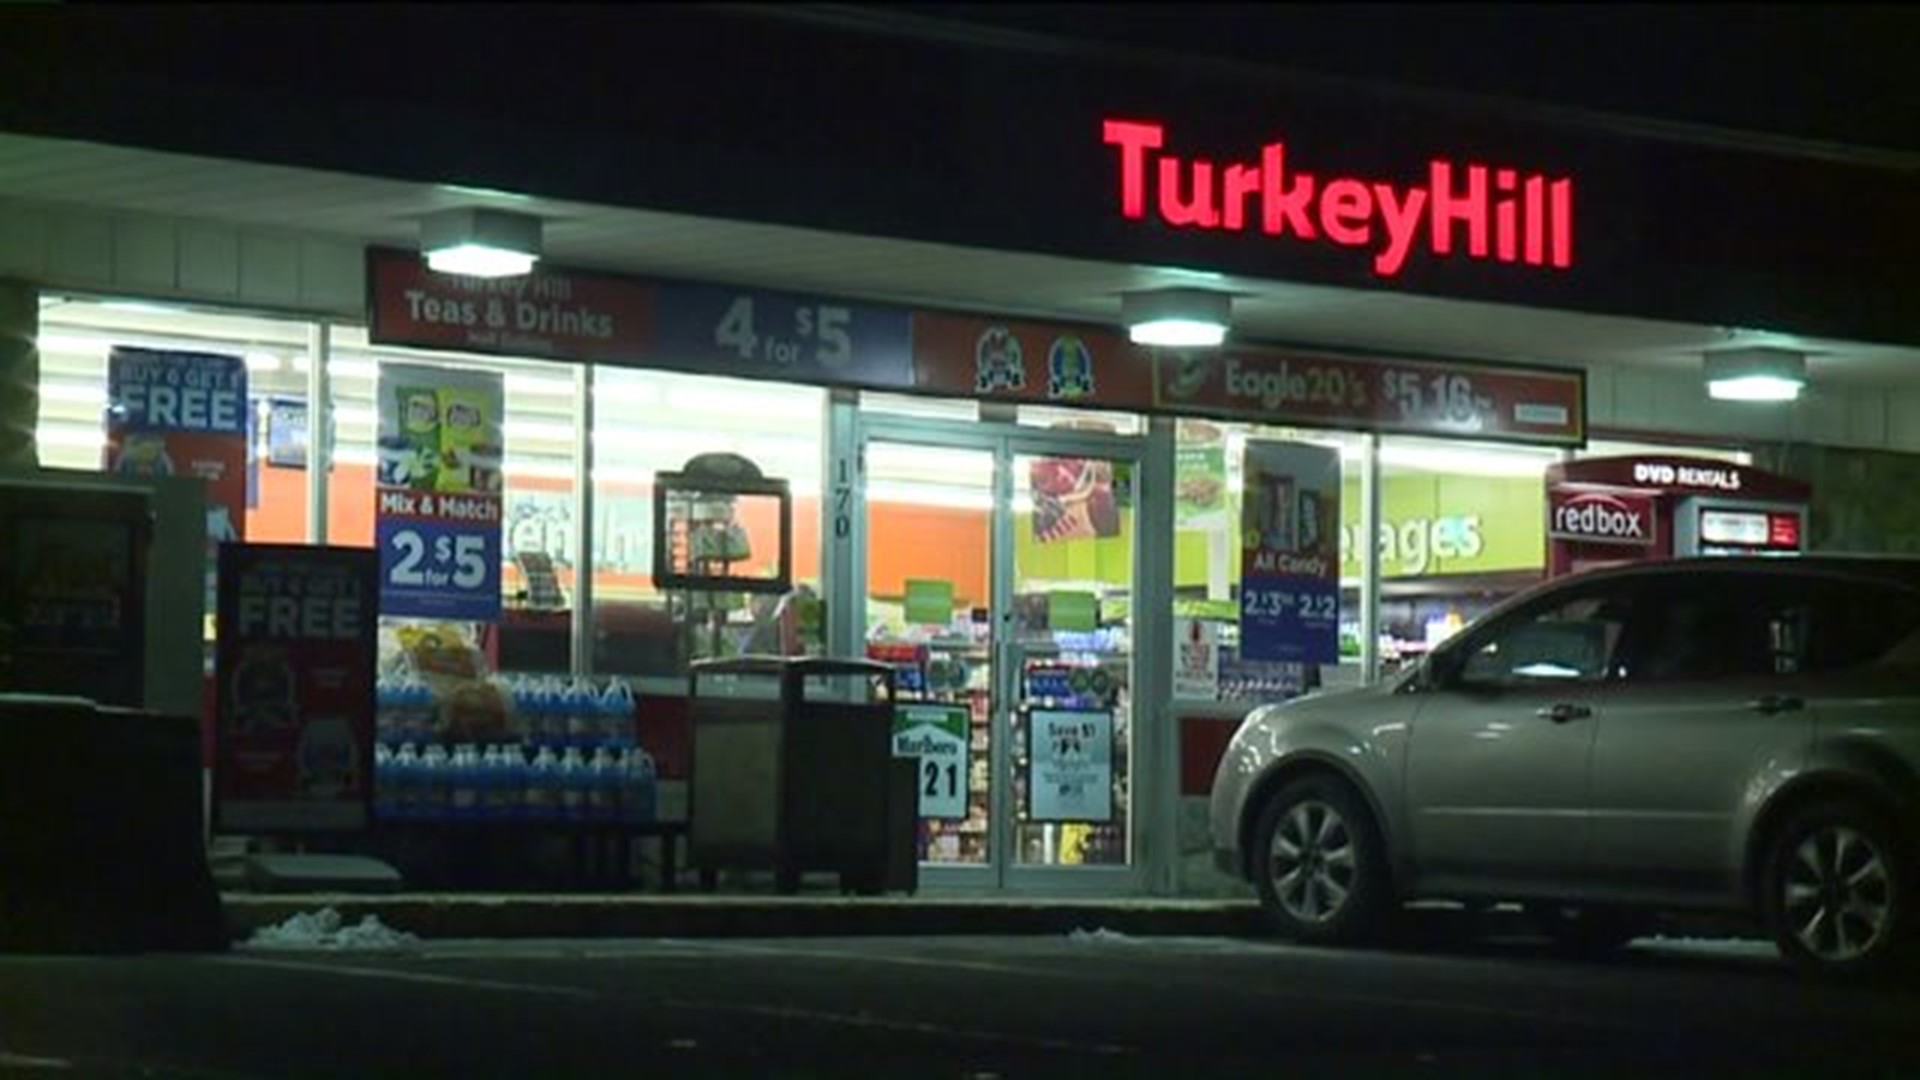 Armed Robbery at Wilkes-Barre Turkey Hill